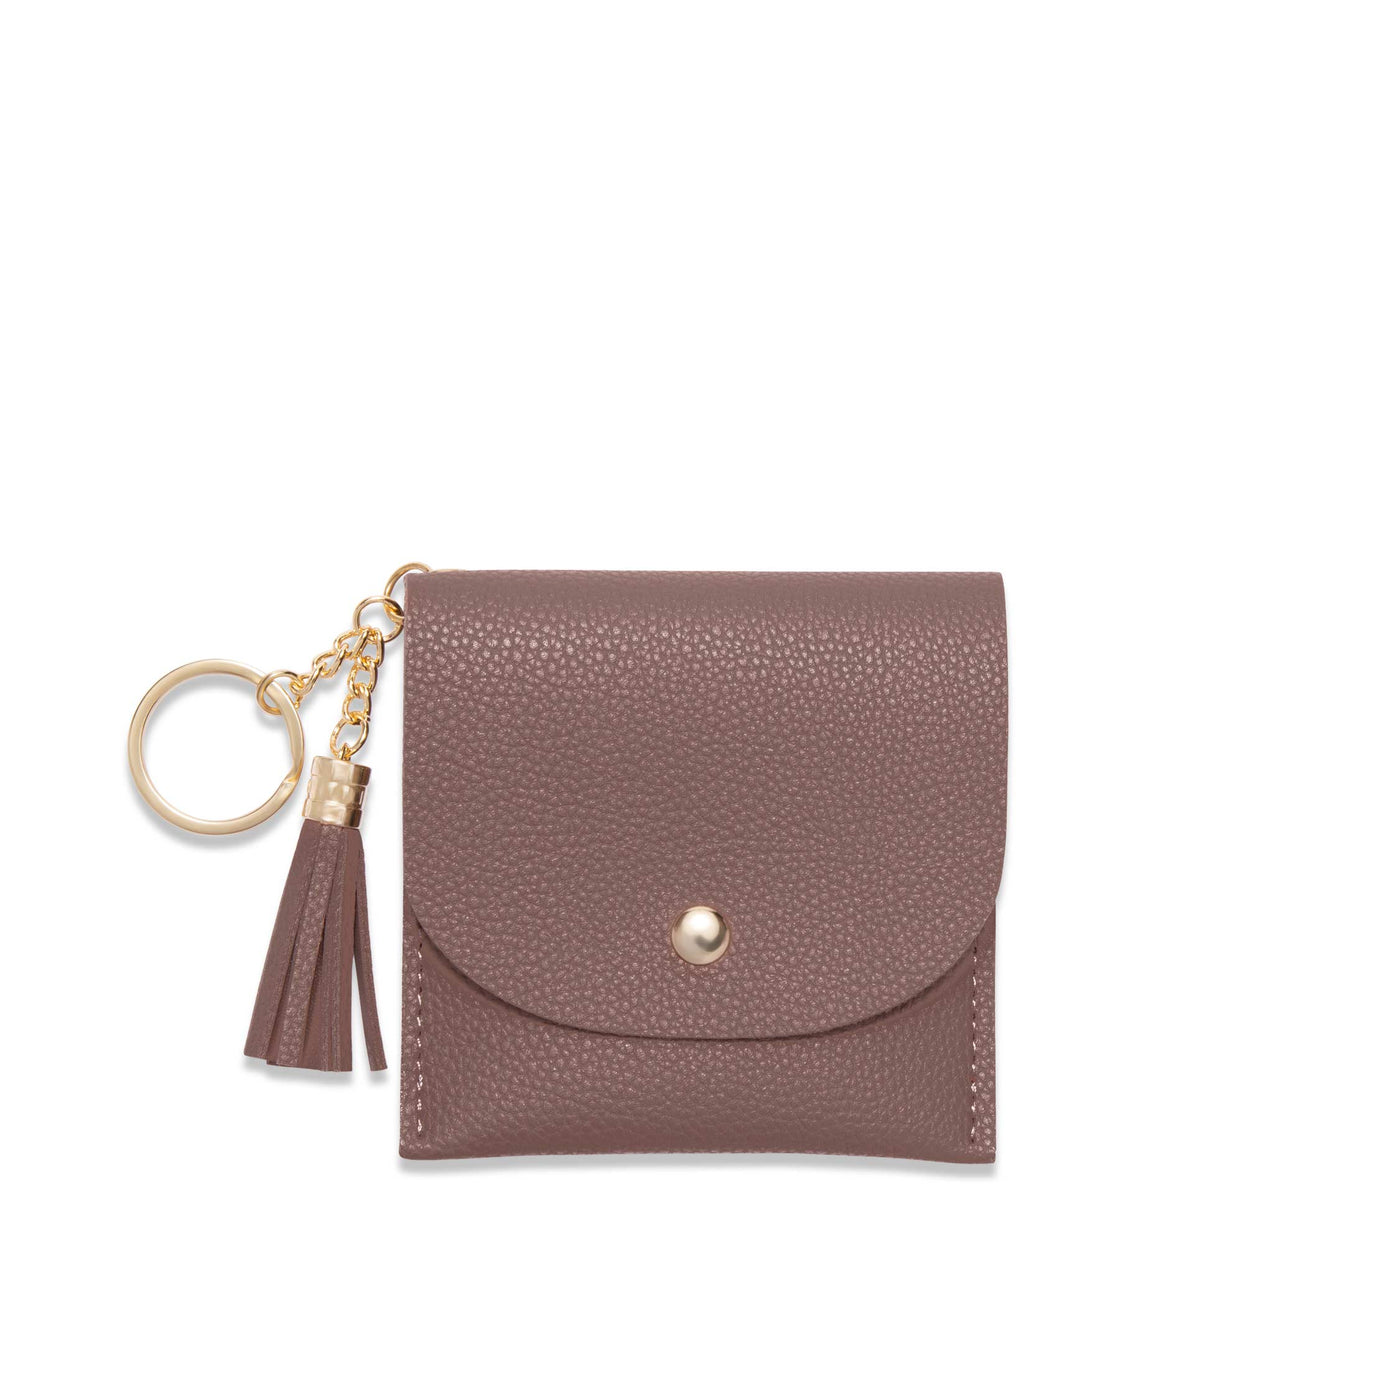 Lark and Ives / Vegan Leather Accessories / Small Accessories / Wallet / Mini Wallet / Card Case / Card Holder / Button snap closure / Flap Wallet / Card Purse with Gold Button and Keyring / Mauve